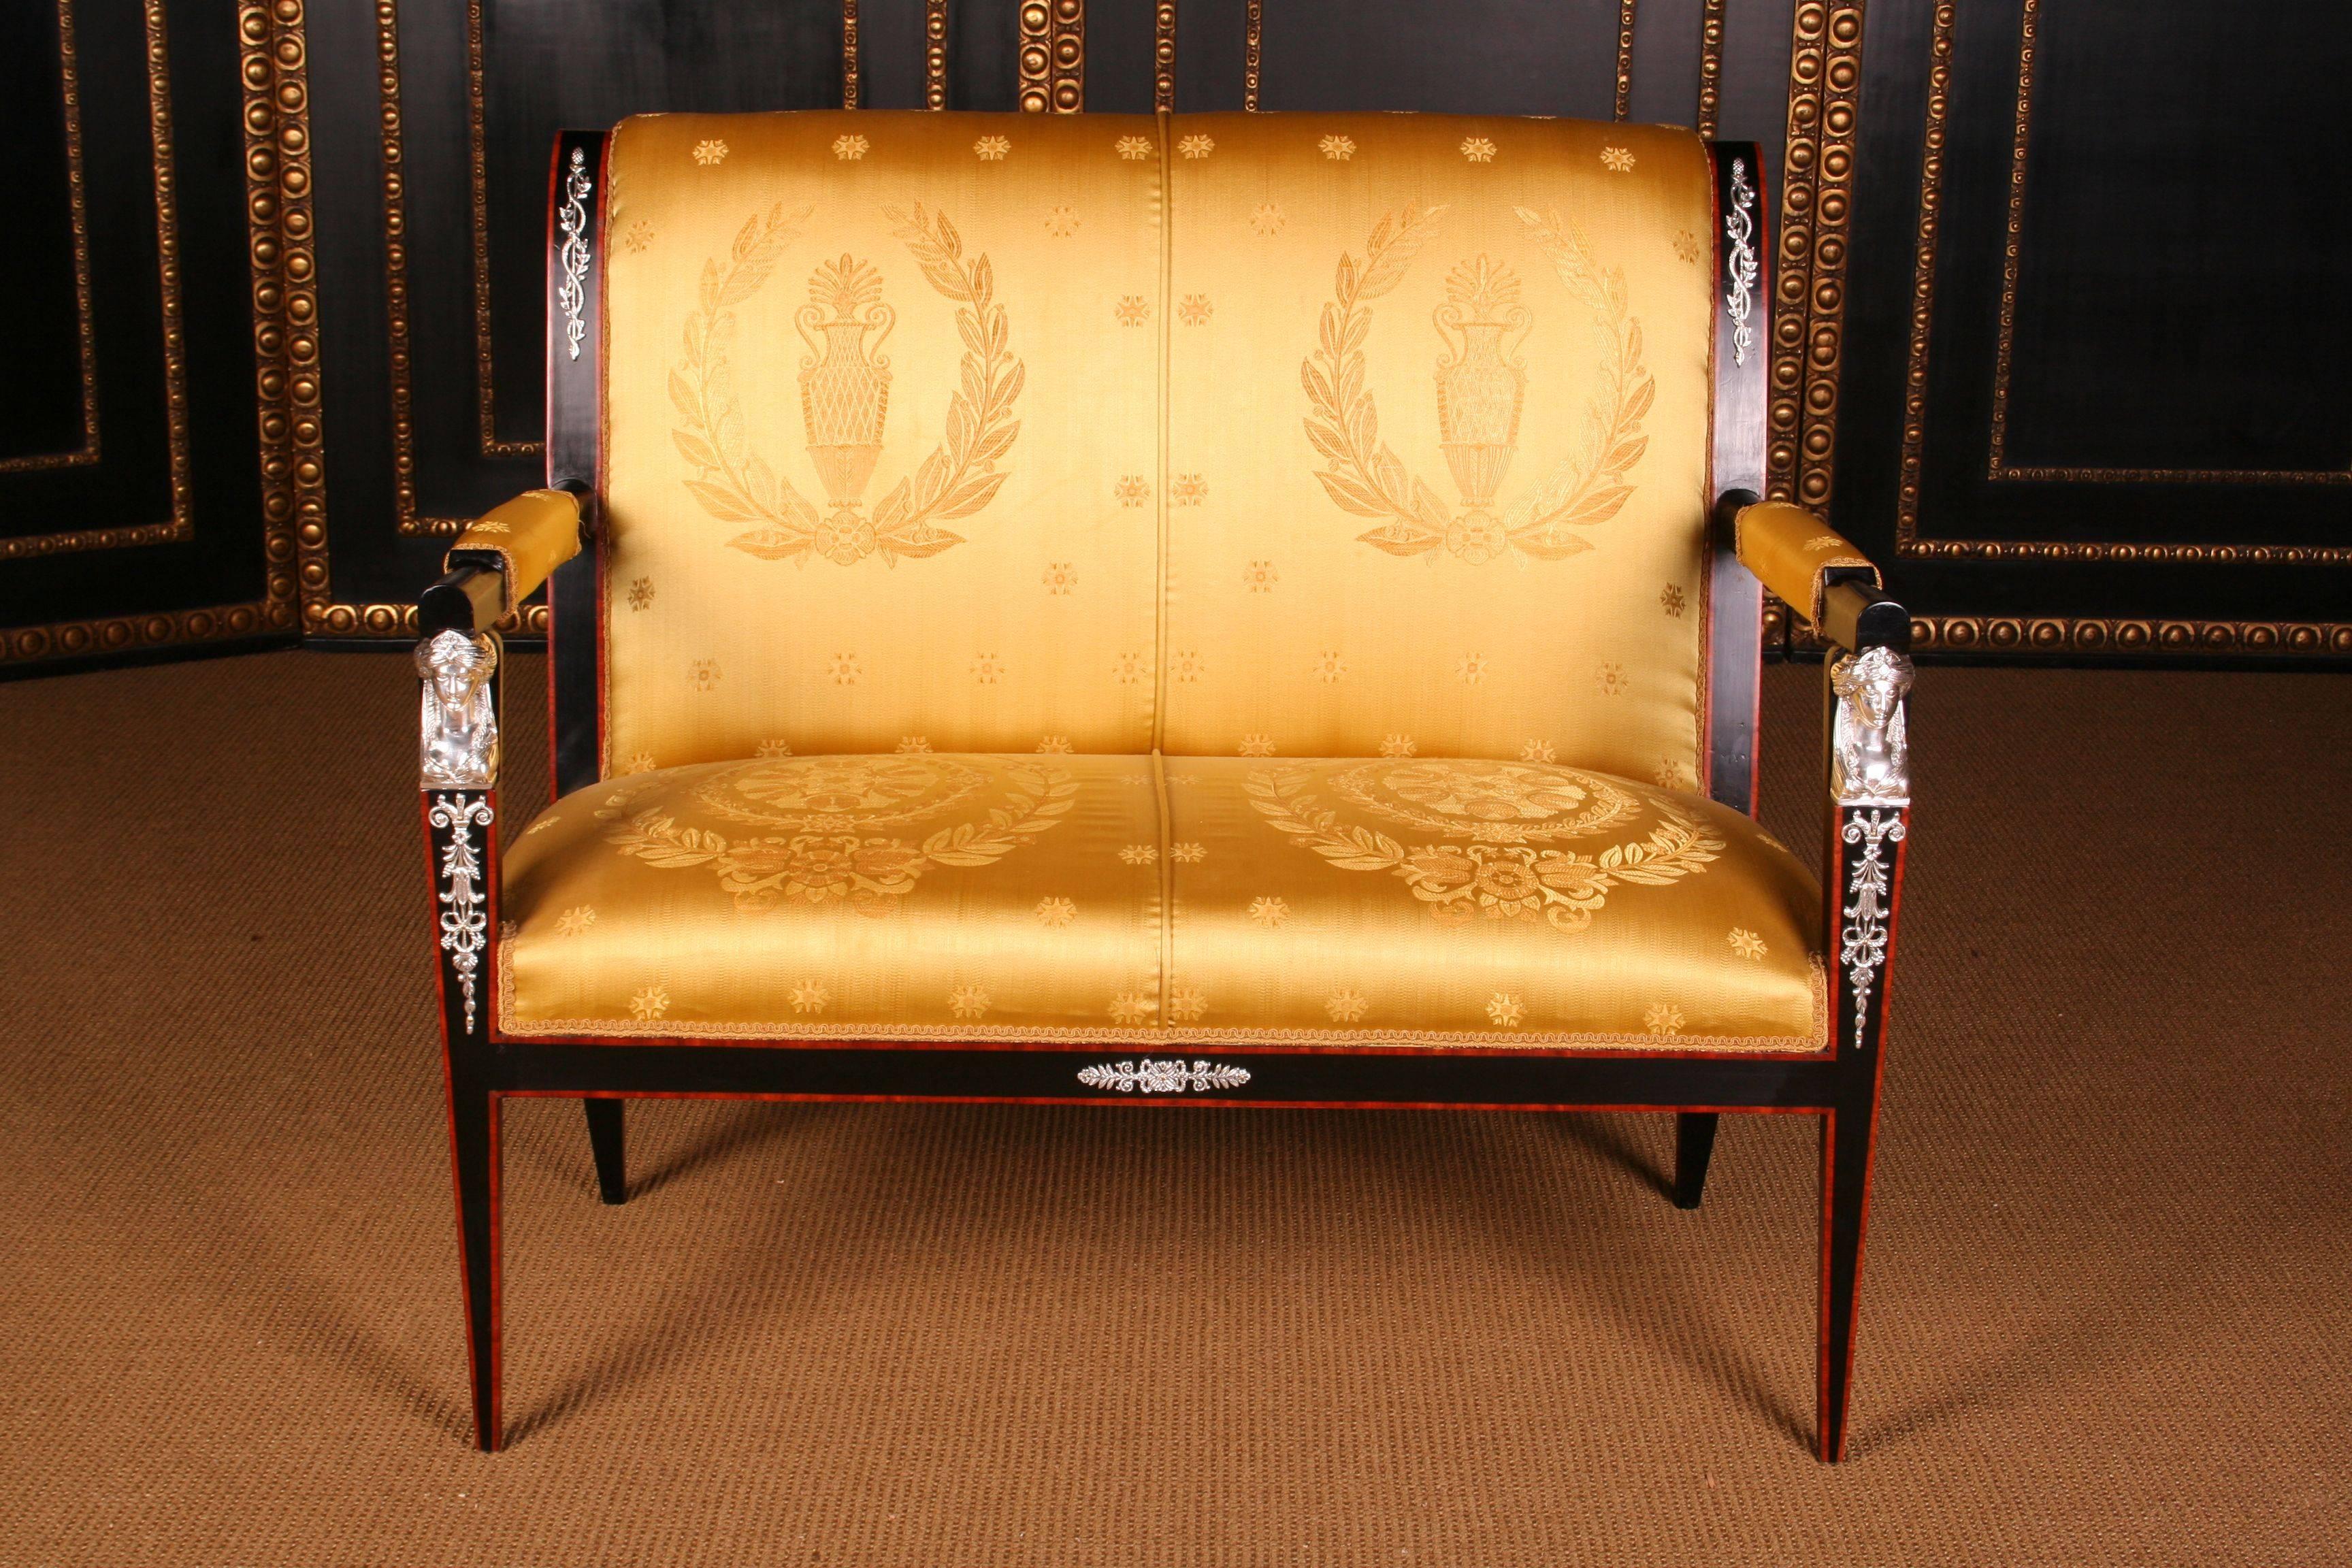 Imperial garniture in French Empire style.
Solid, ebonized beechwood. Fine engraved and silver plated Empire mountings and caryatides.

Measures: Kanapee/sofa: Width 108 cm, height 98 cm, depth 65 cm
Armchair: Width 56 cm, height 98 cm, depth 62